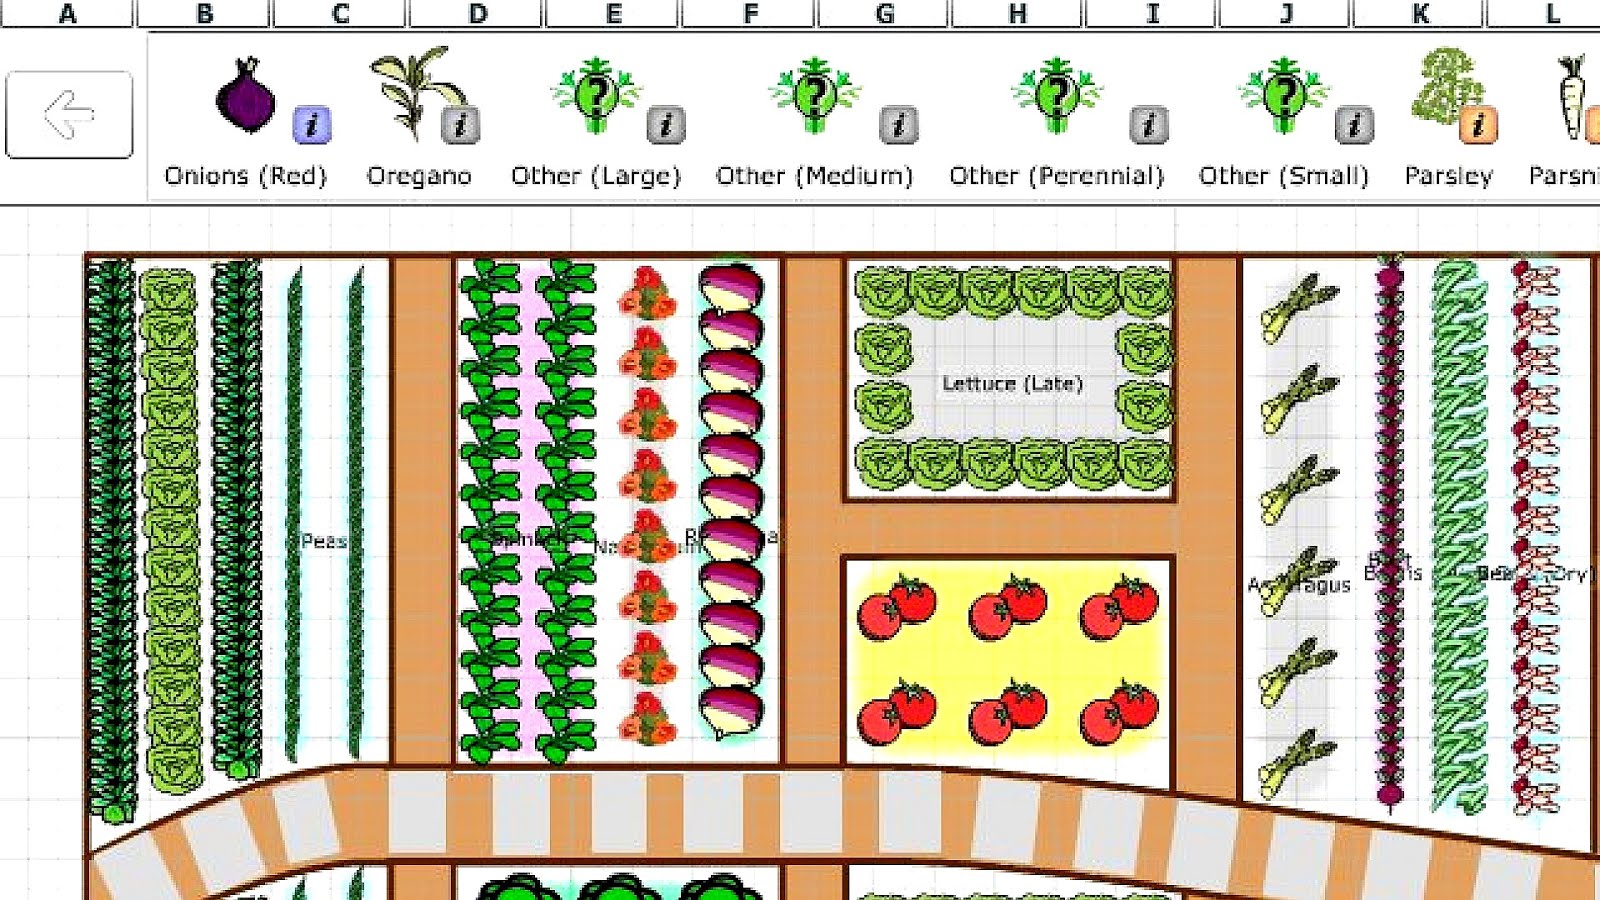  how to plan a garden layout